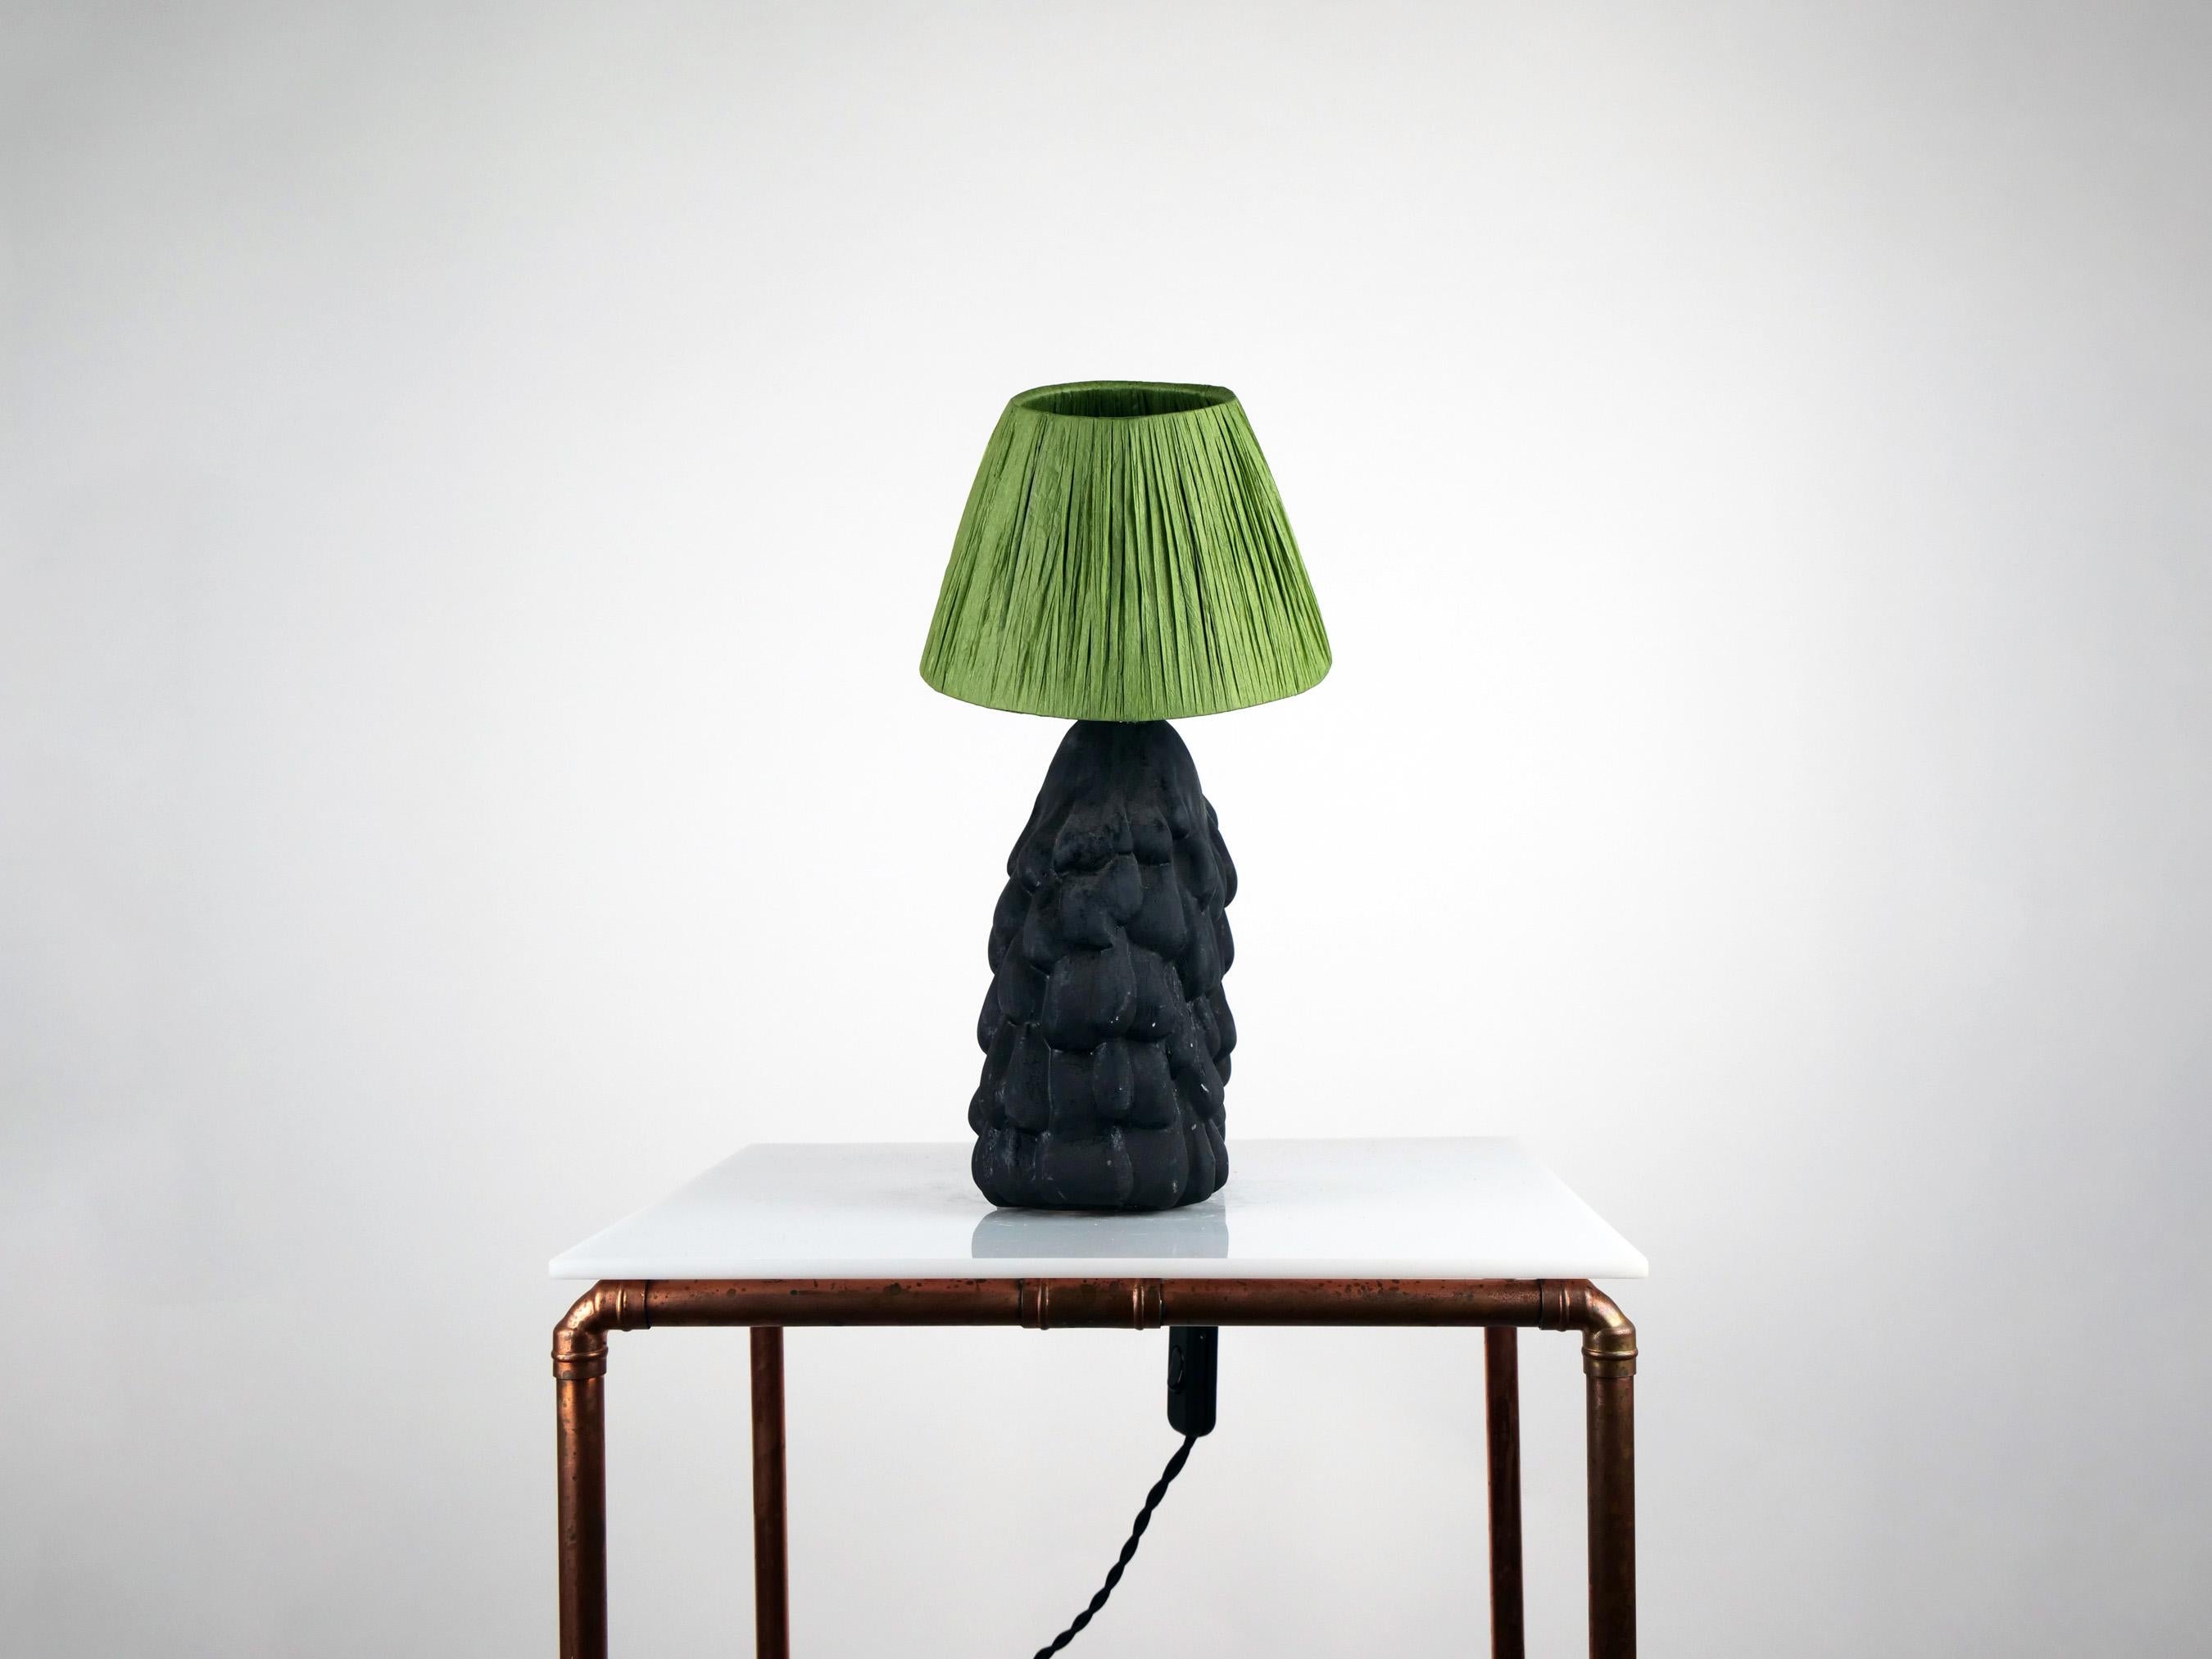 Matte black base with green raffia shade.

Estimated processing time is 4 weeks from order confirmation.

Pictured with a Mini Globe LED E27 Bulb. Bulb not included.

To pair this base with a shade in an alternative colour or material, click the